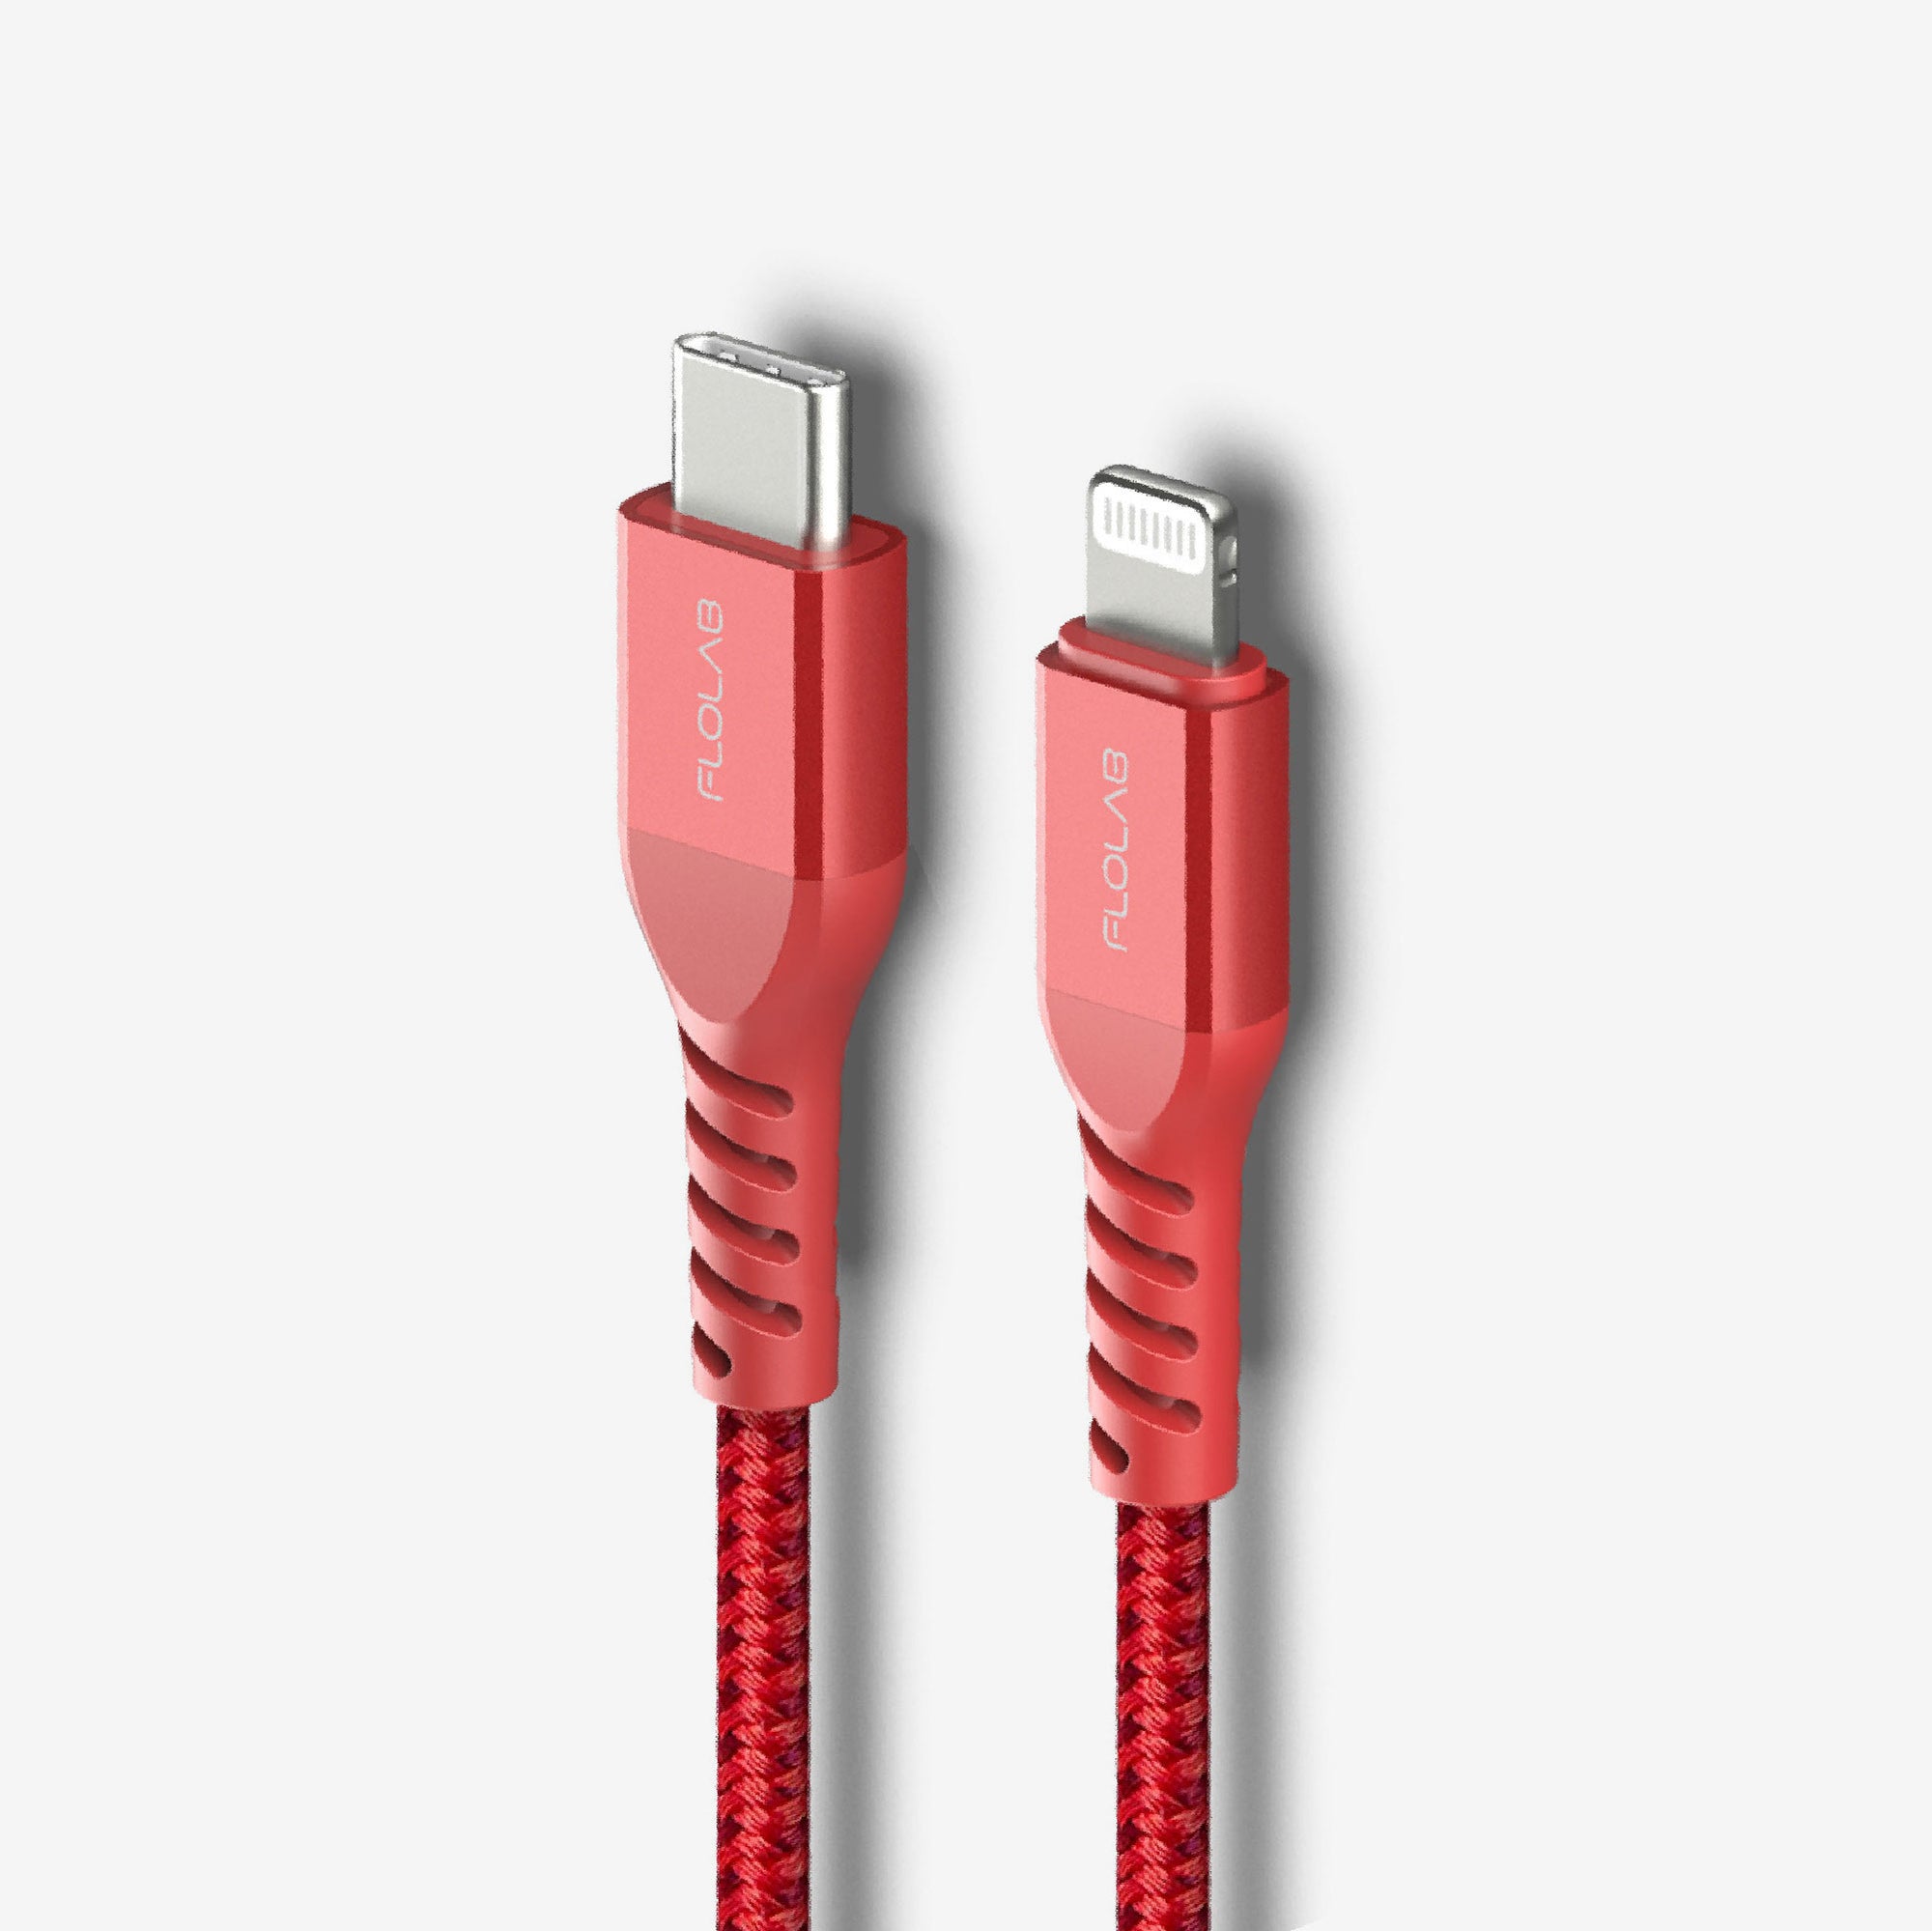 MFI Alumiflo USB-C to Lightning Cable | Fast and Reliable Charging